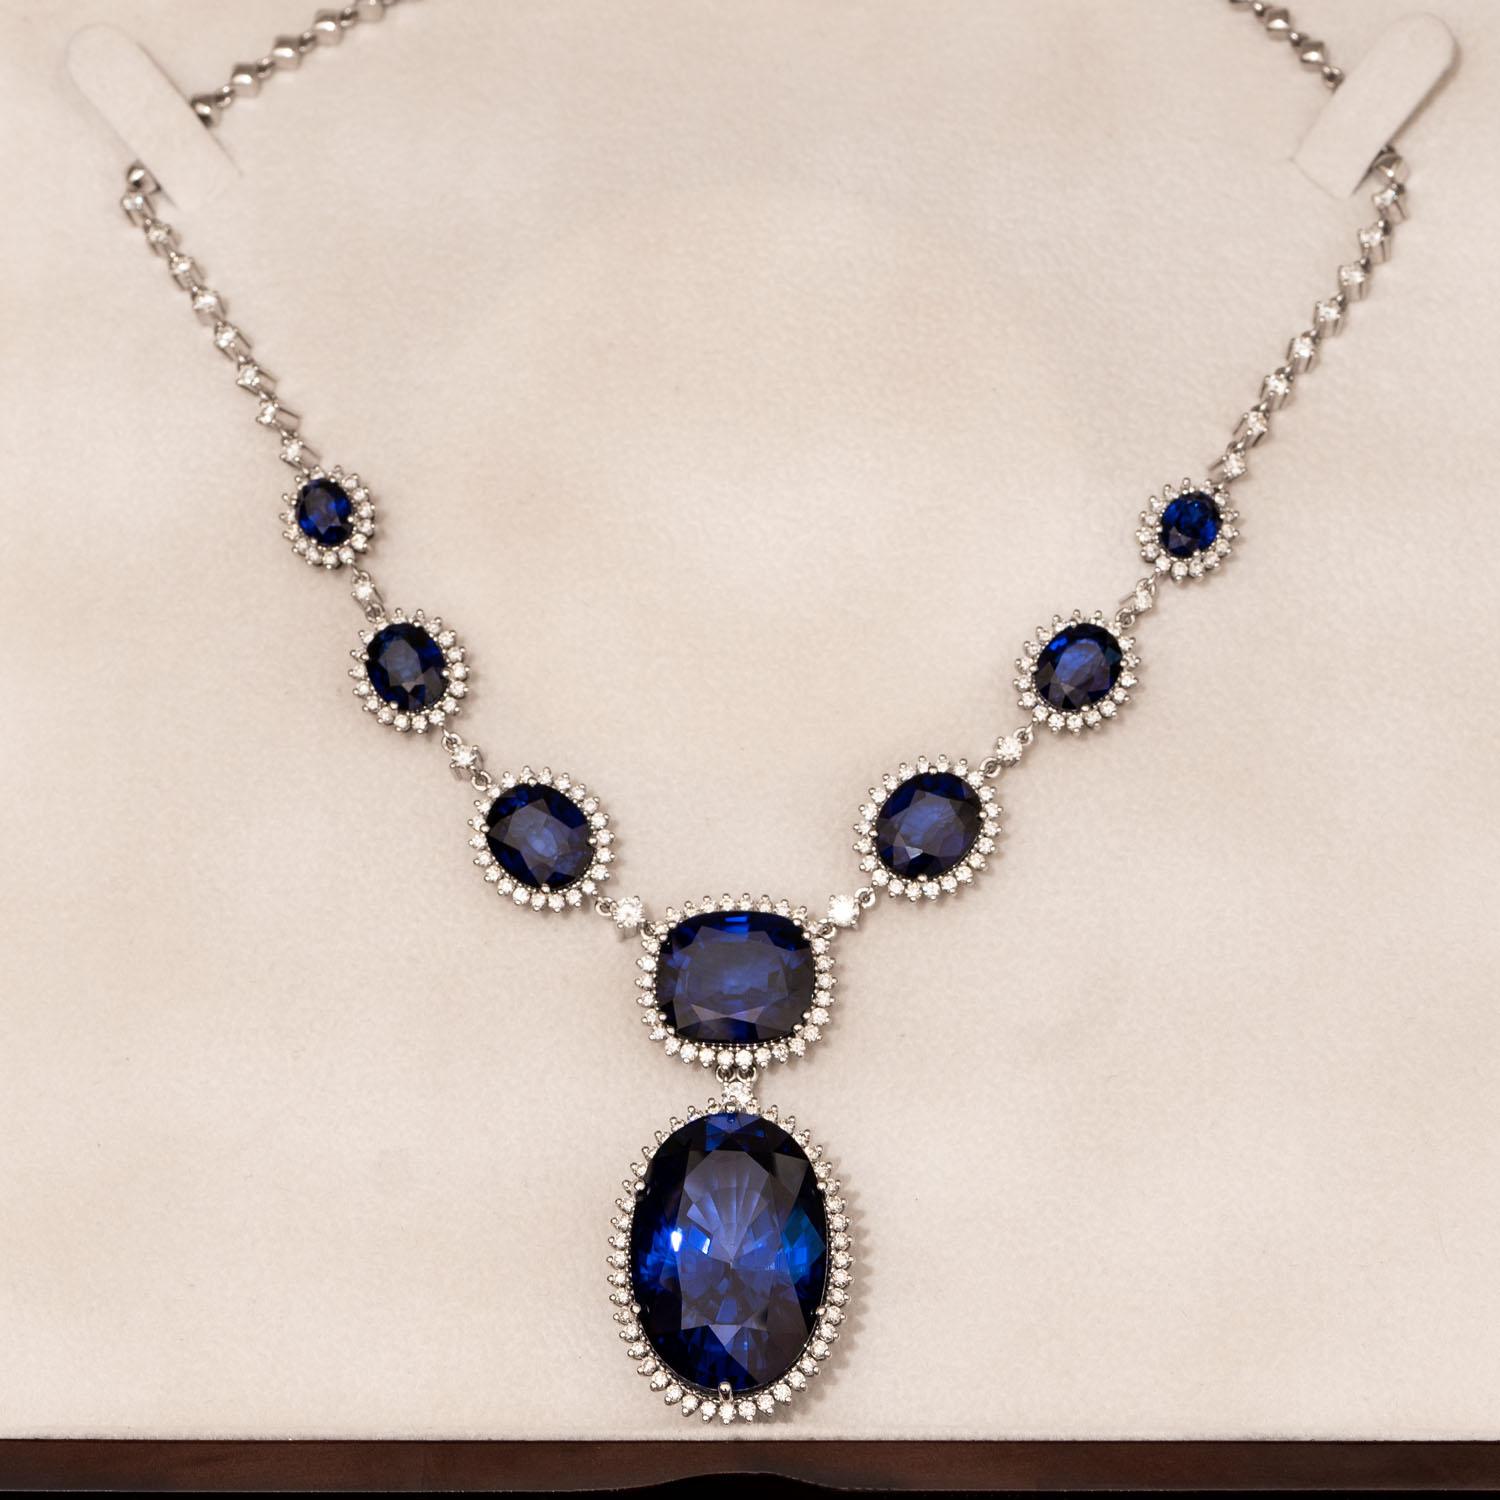 * Custom Order - Process time for this item is 30 business days.
Stunning Sapphire diamond statement necklace. The royal blue color and extraordinary design make it the ultimate eye-catcher. This gorgeous collier includes 71.00 carat lab corundum